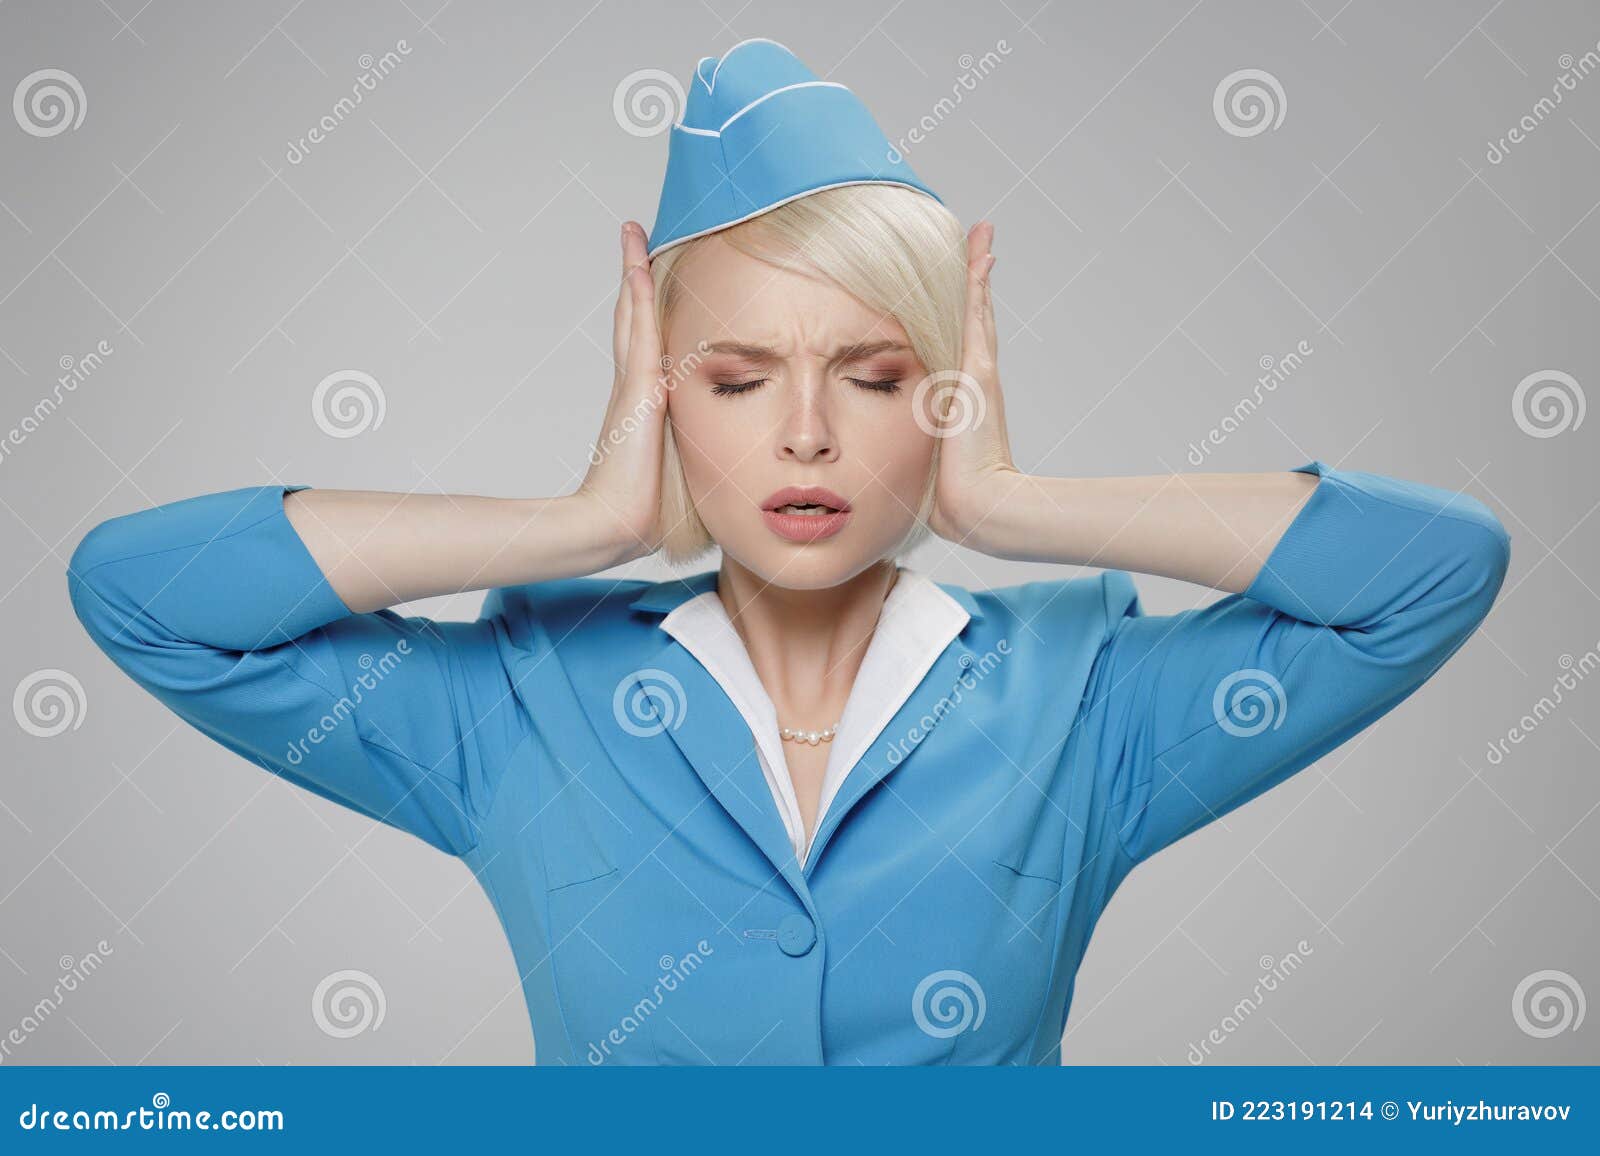 stewardess in stressful situation. fright, hysterics, phobia. gray background